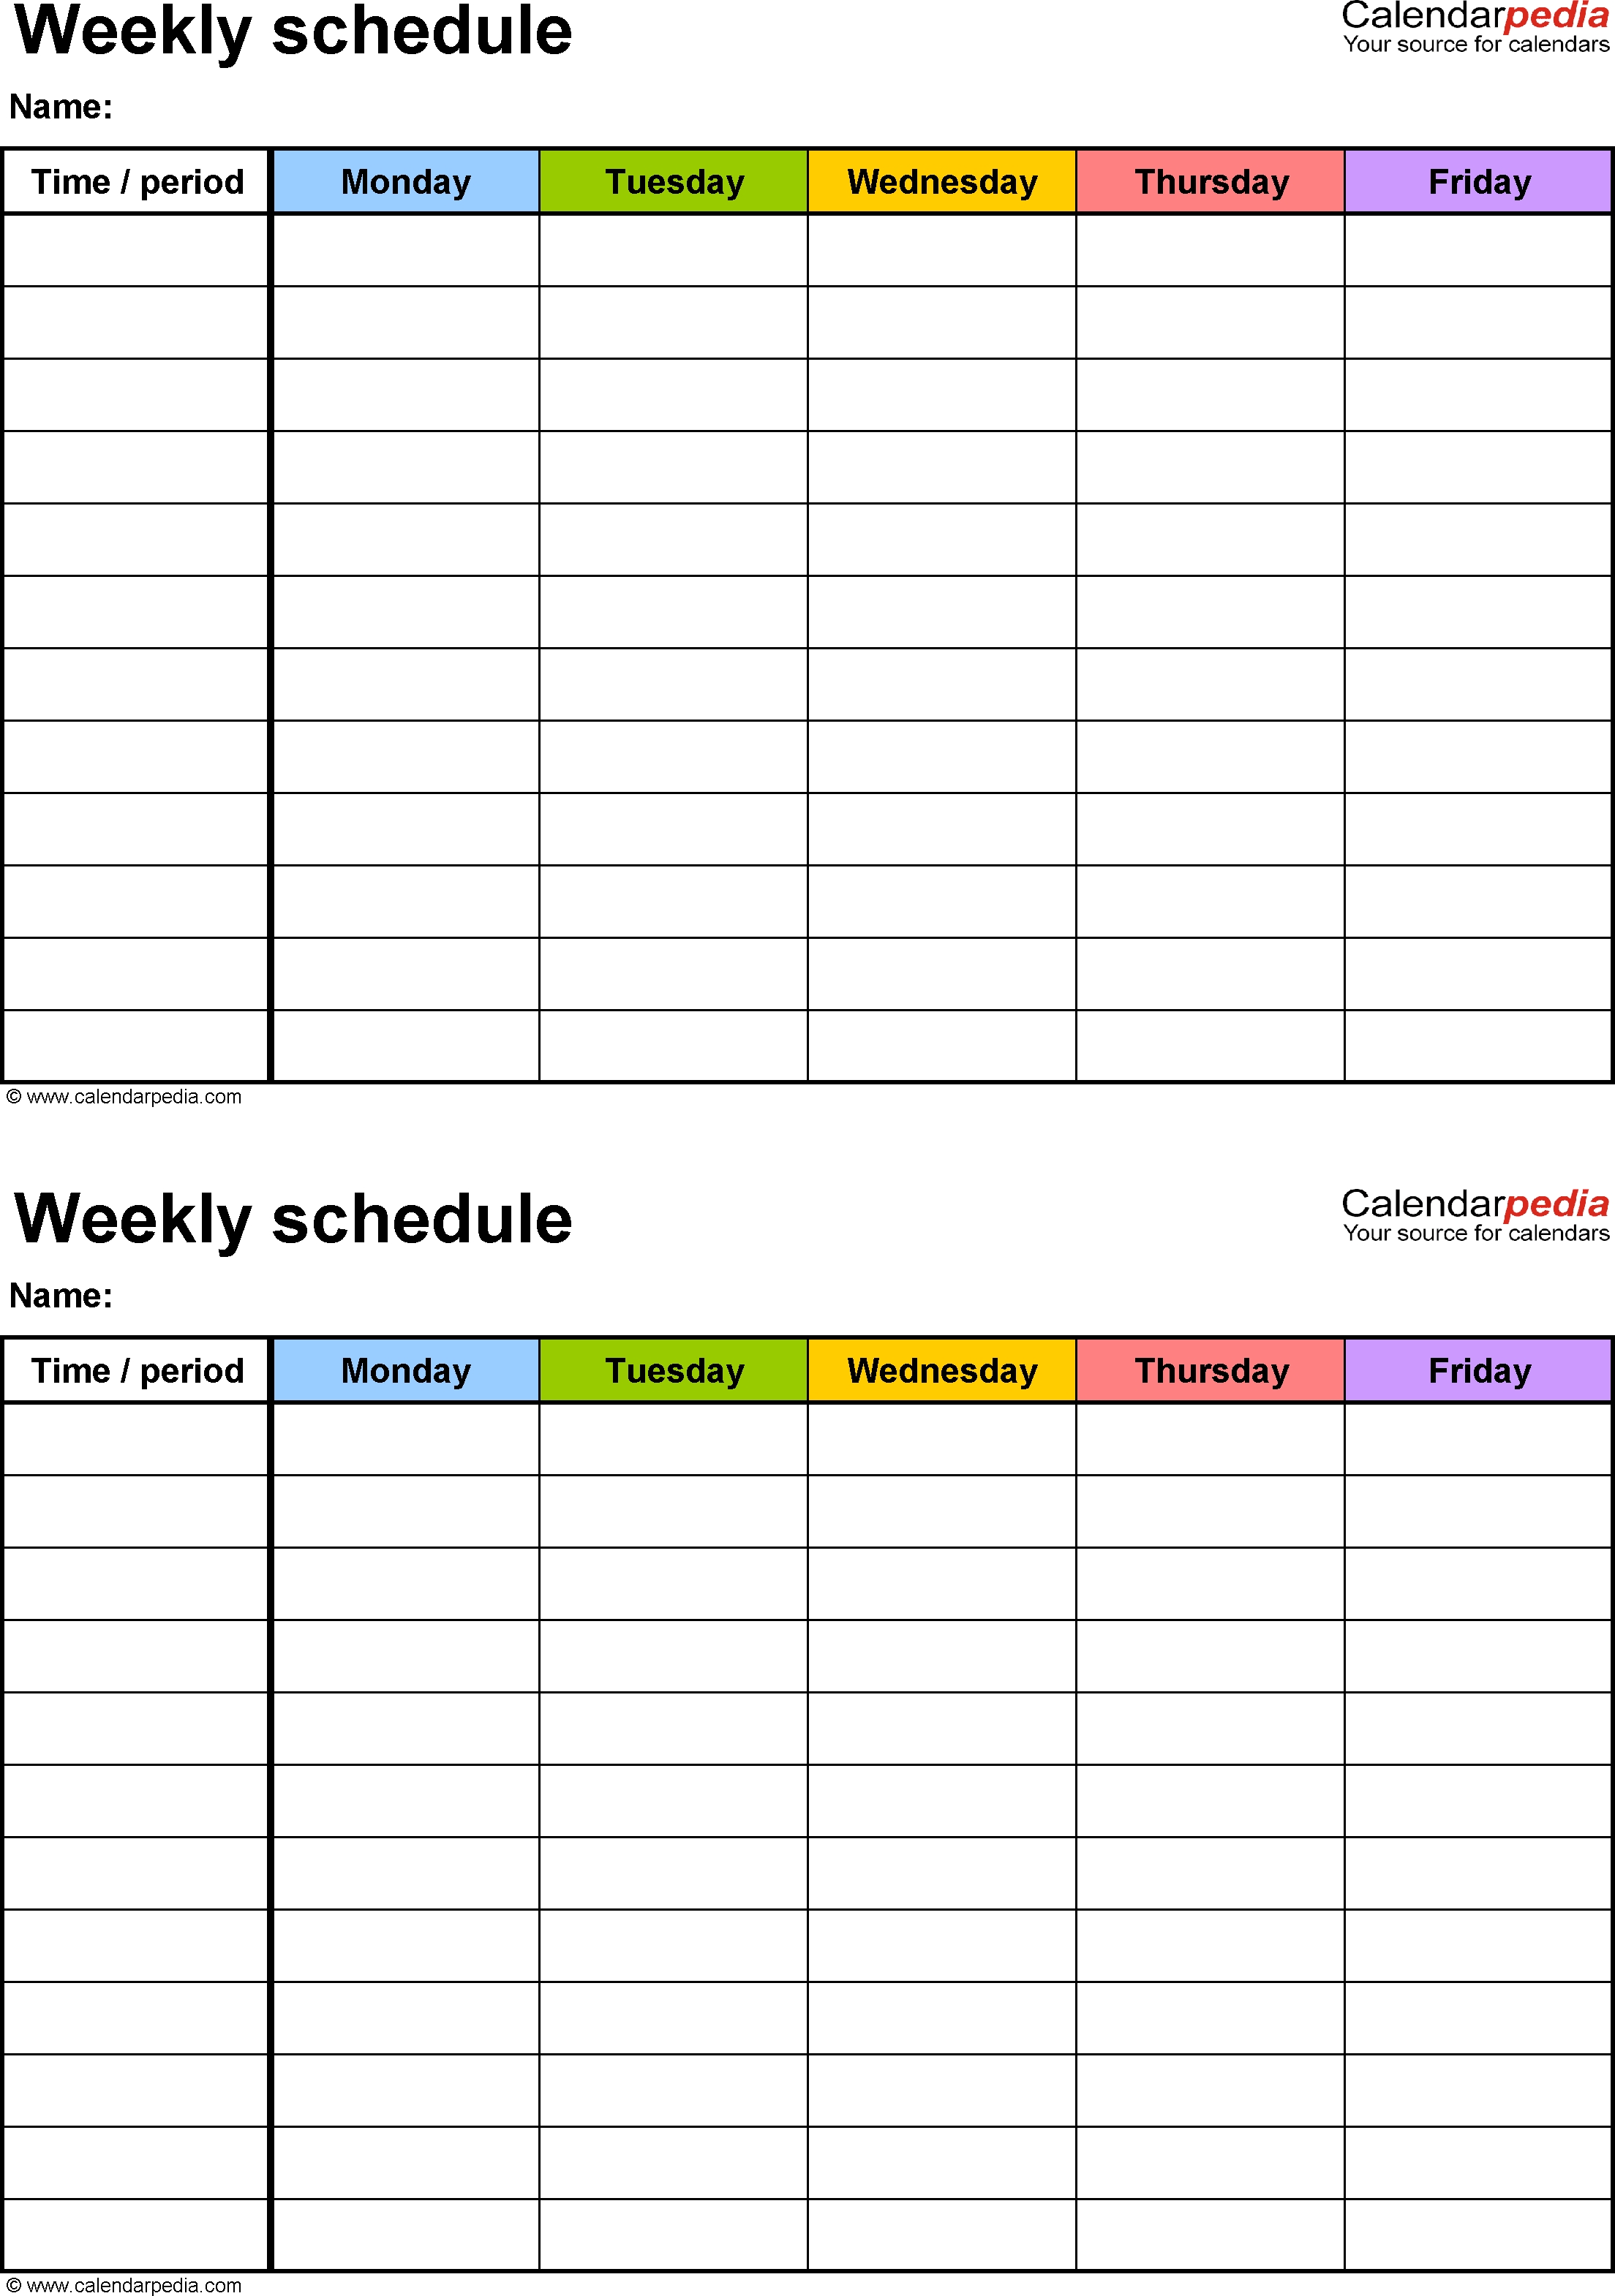 Free Weekly Schedule Templates For Excel - 18 Templates-Google Sheets Template School Calendar